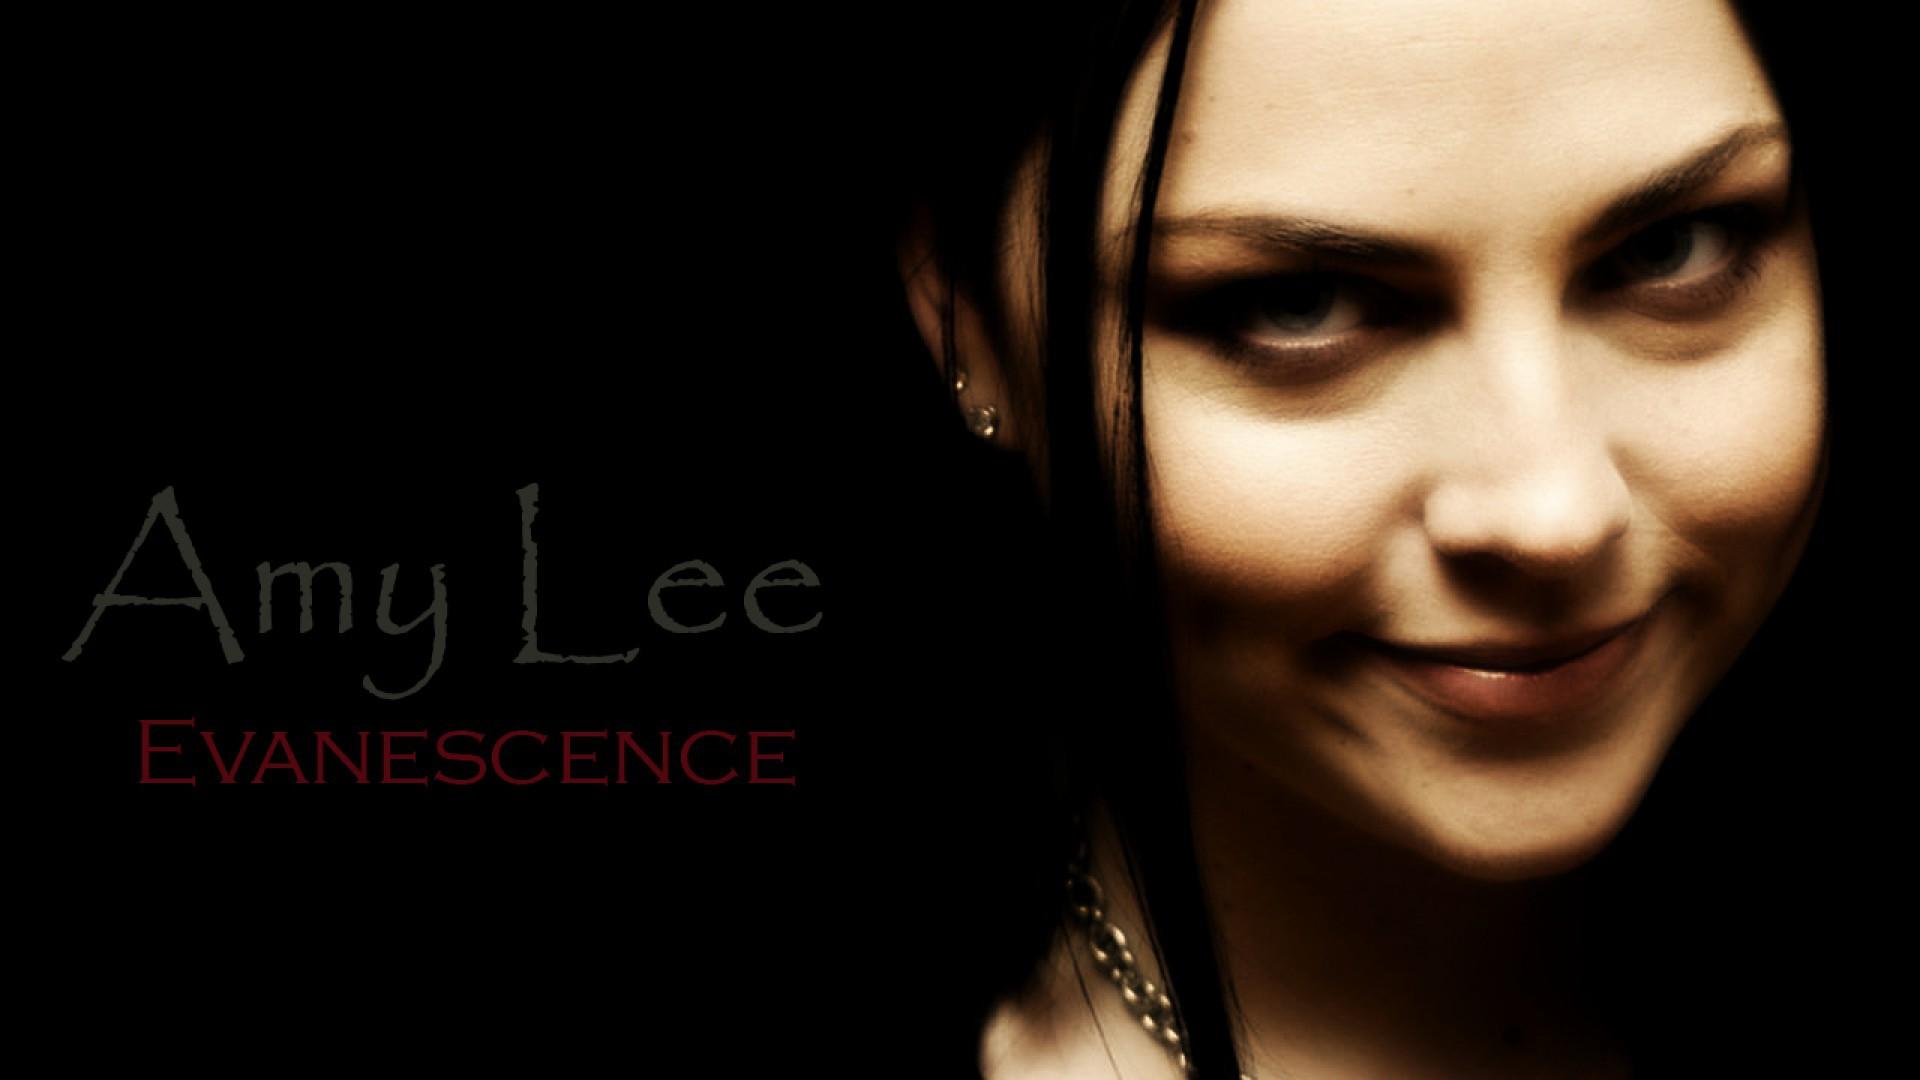 Amy Lee Evanescence Wallpaper 1920x1080